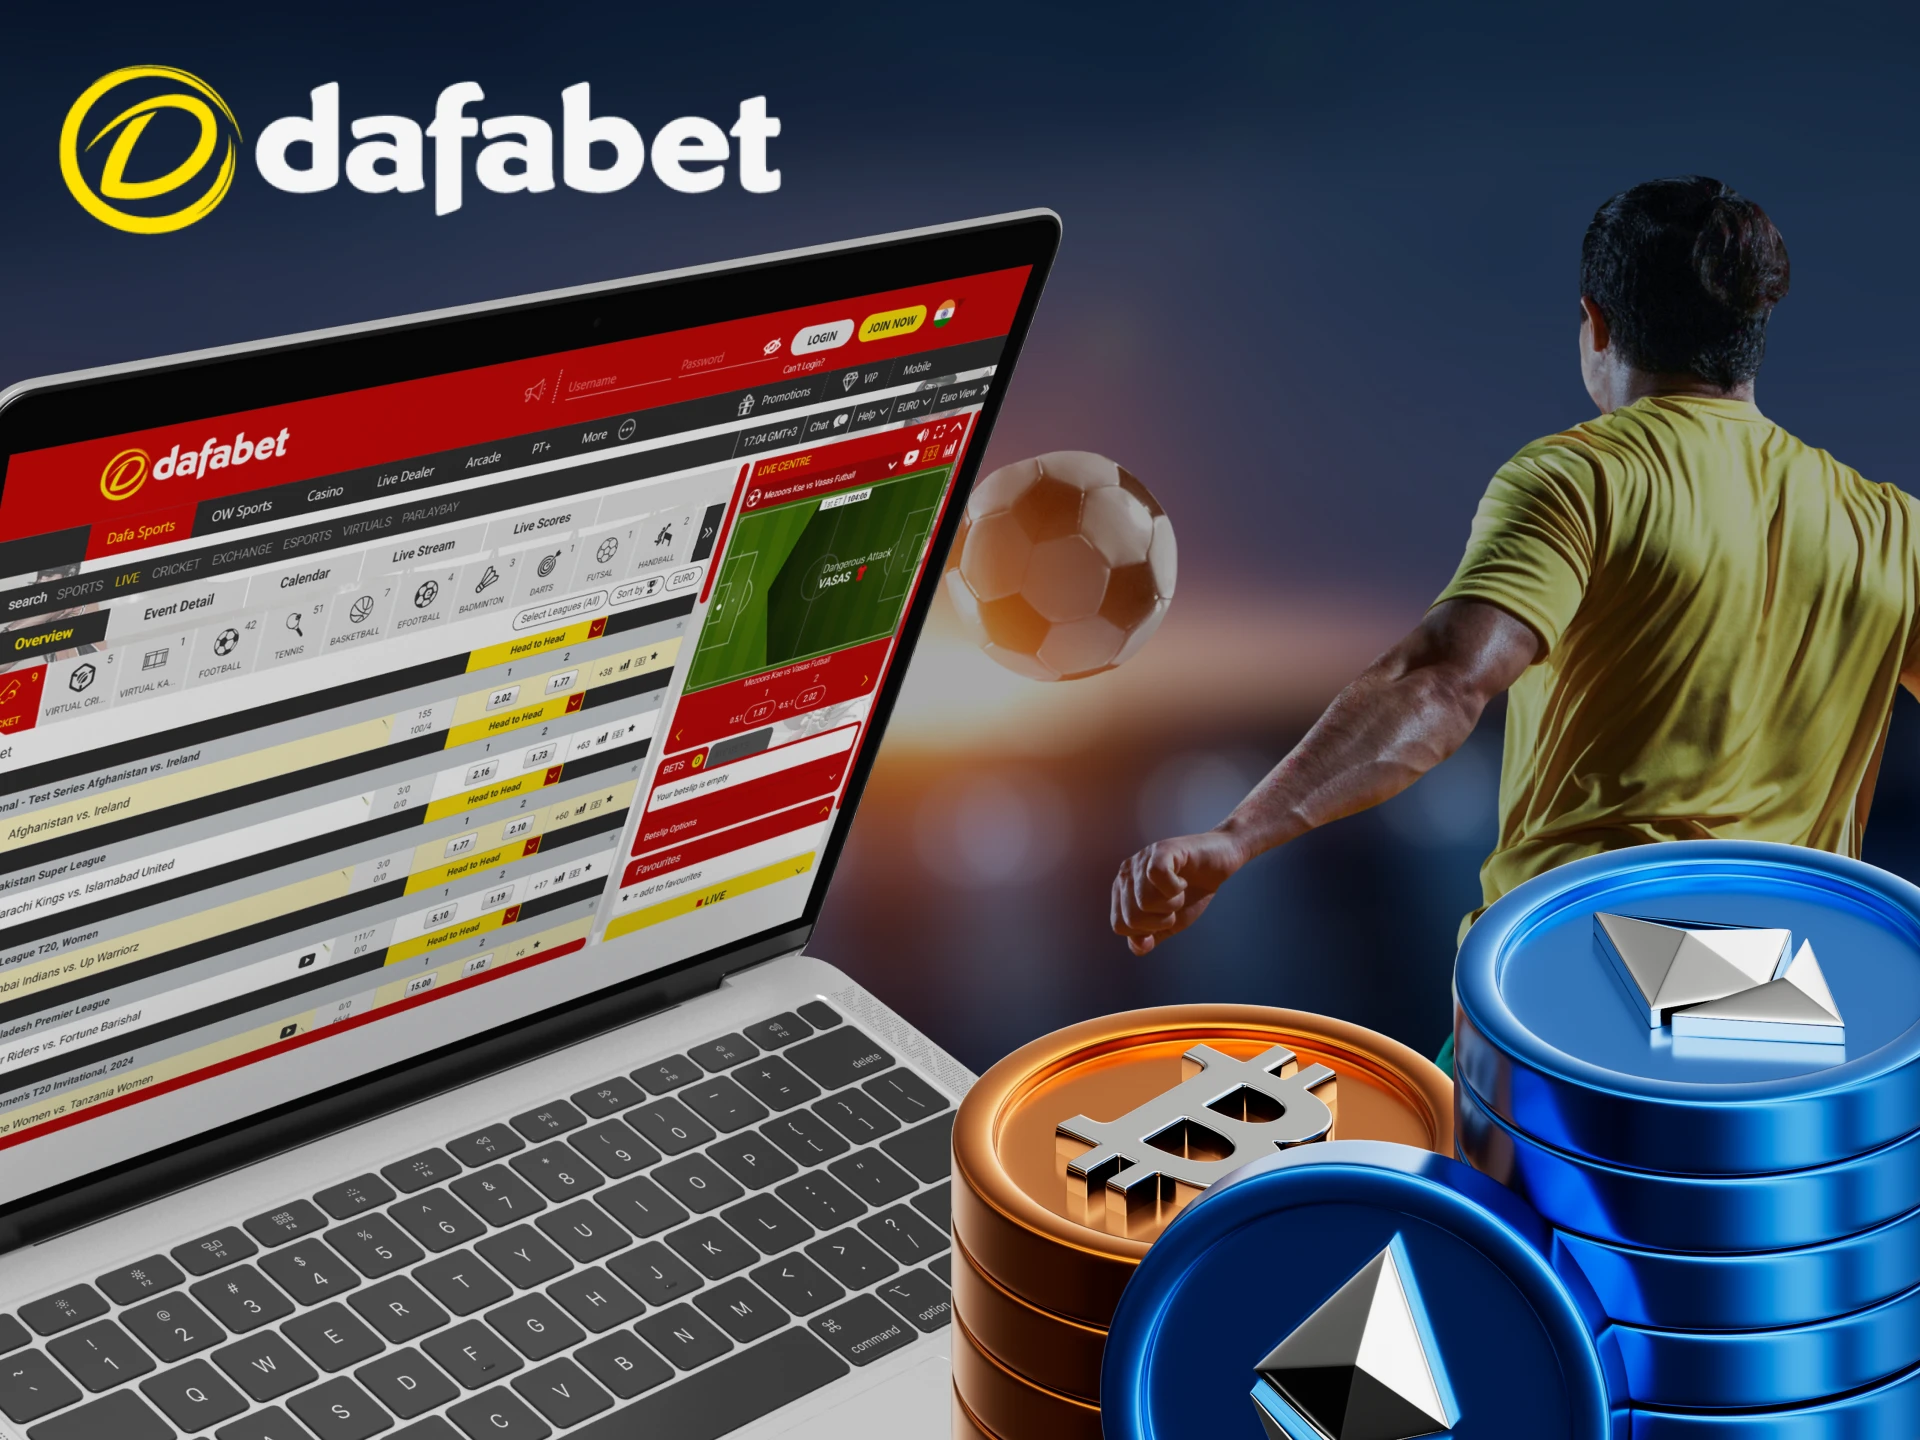 Try placing a cryptocurrency bet on your favorite sports team at Dafabet.